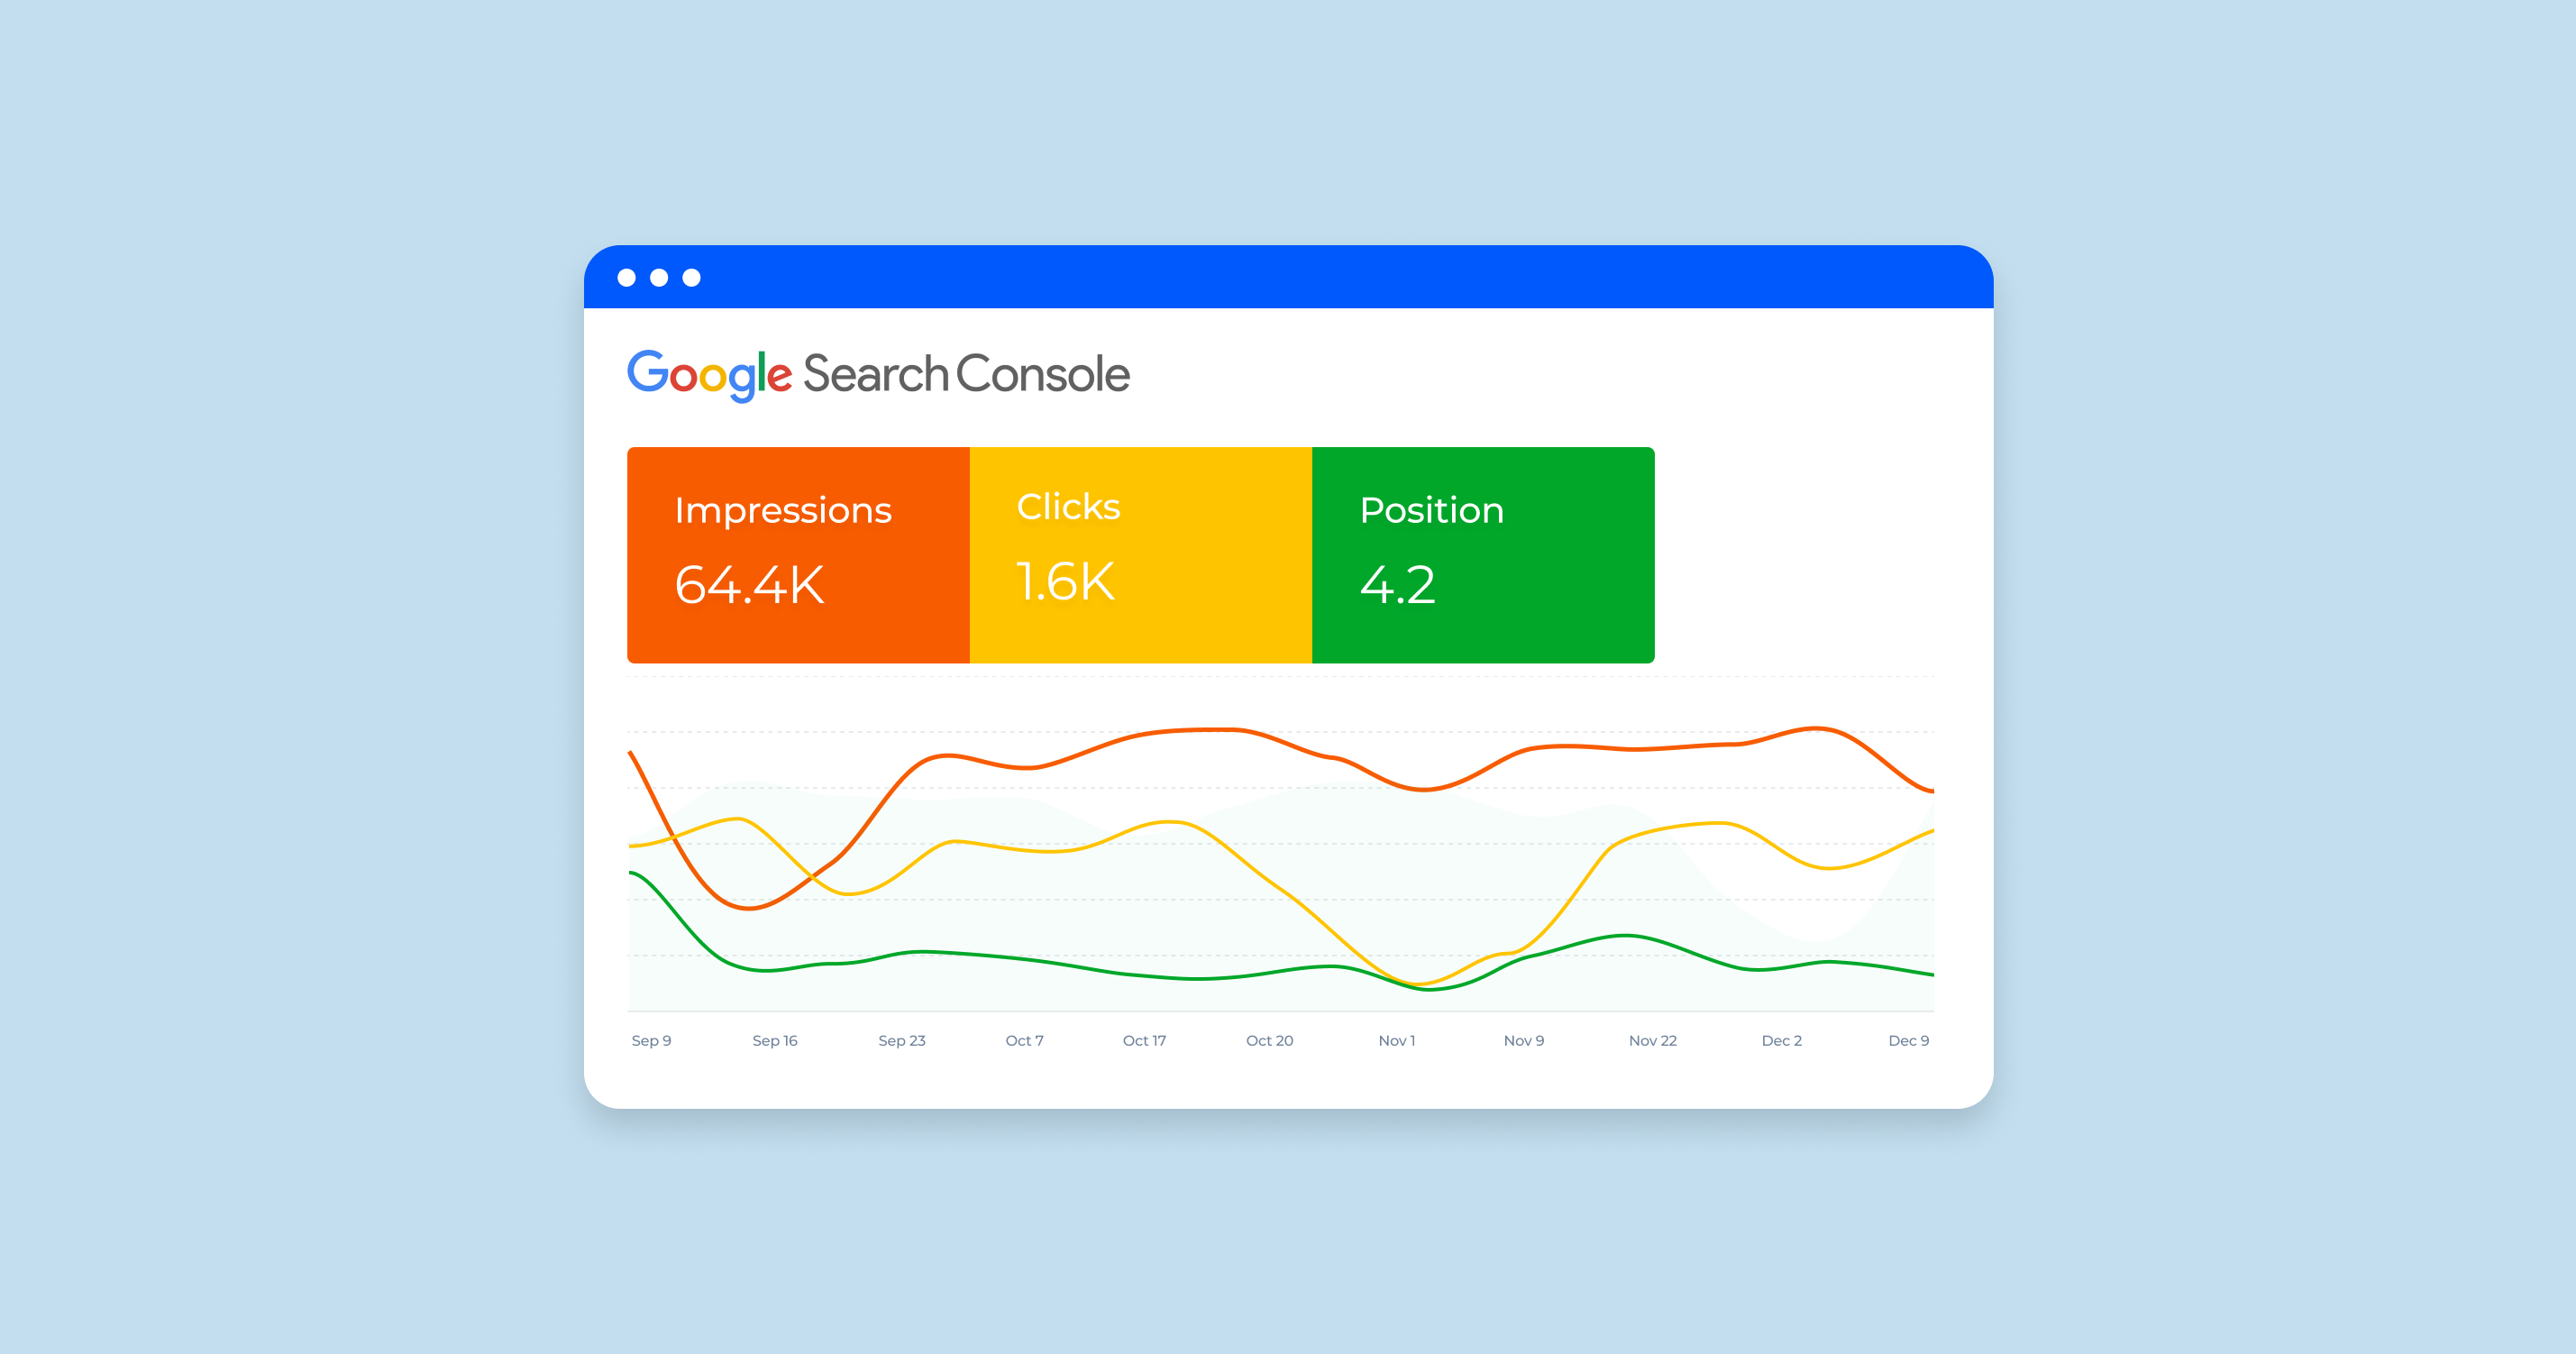 What are Impressions, Clicks, and Position in Google Search Console?